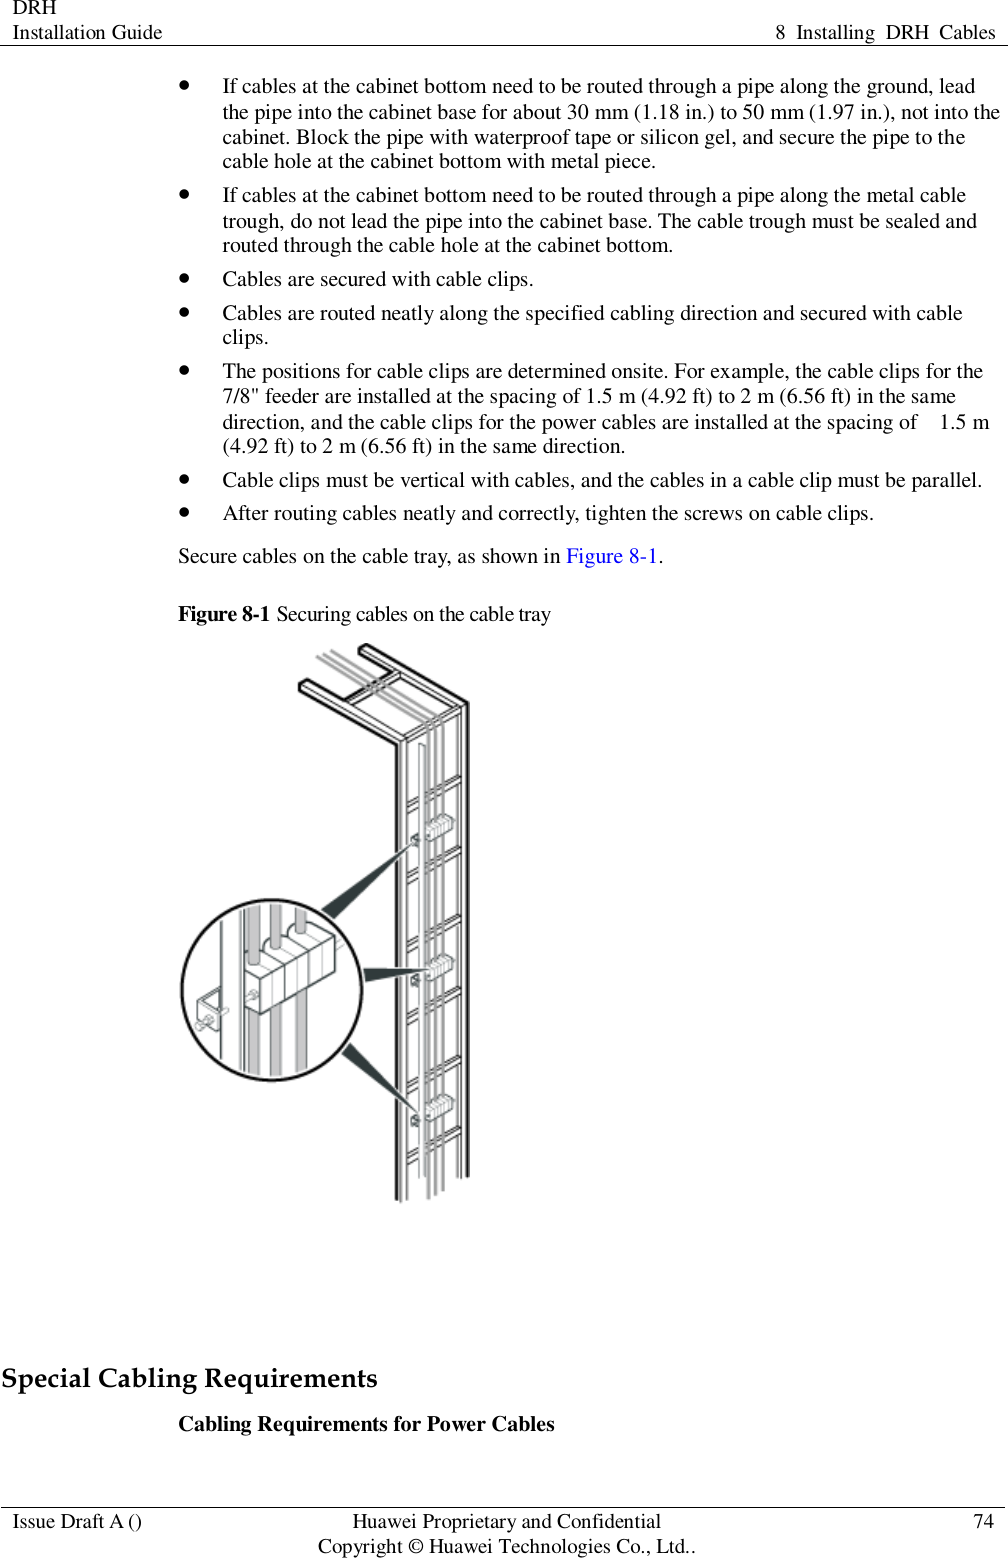 DRH   Installation Guide 8  Installing  DRH  Cables  Issue Draft A () Huawei Proprietary and Confidential                                     Copyright © Huawei Technologies Co., Ltd.. 74   If cables at the cabinet bottom need to be routed through a pipe along the ground, lead the pipe into the cabinet base for about 30 mm (1.18 in.) to 50 mm (1.97 in.), not into the cabinet. Block the pipe with waterproof tape or silicon gel, and secure the pipe to the cable hole at the cabinet bottom with metal piece.  If cables at the cabinet bottom need to be routed through a pipe along the metal cable trough, do not lead the pipe into the cabinet base. The cable trough must be sealed and routed through the cable hole at the cabinet bottom.  Cables are secured with cable clips.  Cables are routed neatly along the specified cabling direction and secured with cable clips.  The positions for cable clips are determined onsite. For example, the cable clips for the 7/8&quot; feeder are installed at the spacing of 1.5 m (4.92 ft) to 2 m (6.56 ft) in the same direction, and the cable clips for the power cables are installed at the spacing of    1.5 m (4.92 ft) to 2 m (6.56 ft) in the same direction.  Cable clips must be vertical with cables, and the cables in a cable clip must be parallel.  After routing cables neatly and correctly, tighten the screws on cable clips. Secure cables on the cable tray, as shown in Figure 8-1. Figure 8-1 Securing cables on the cable tray    Special Cabling Requirements Cabling Requirements for Power Cables 